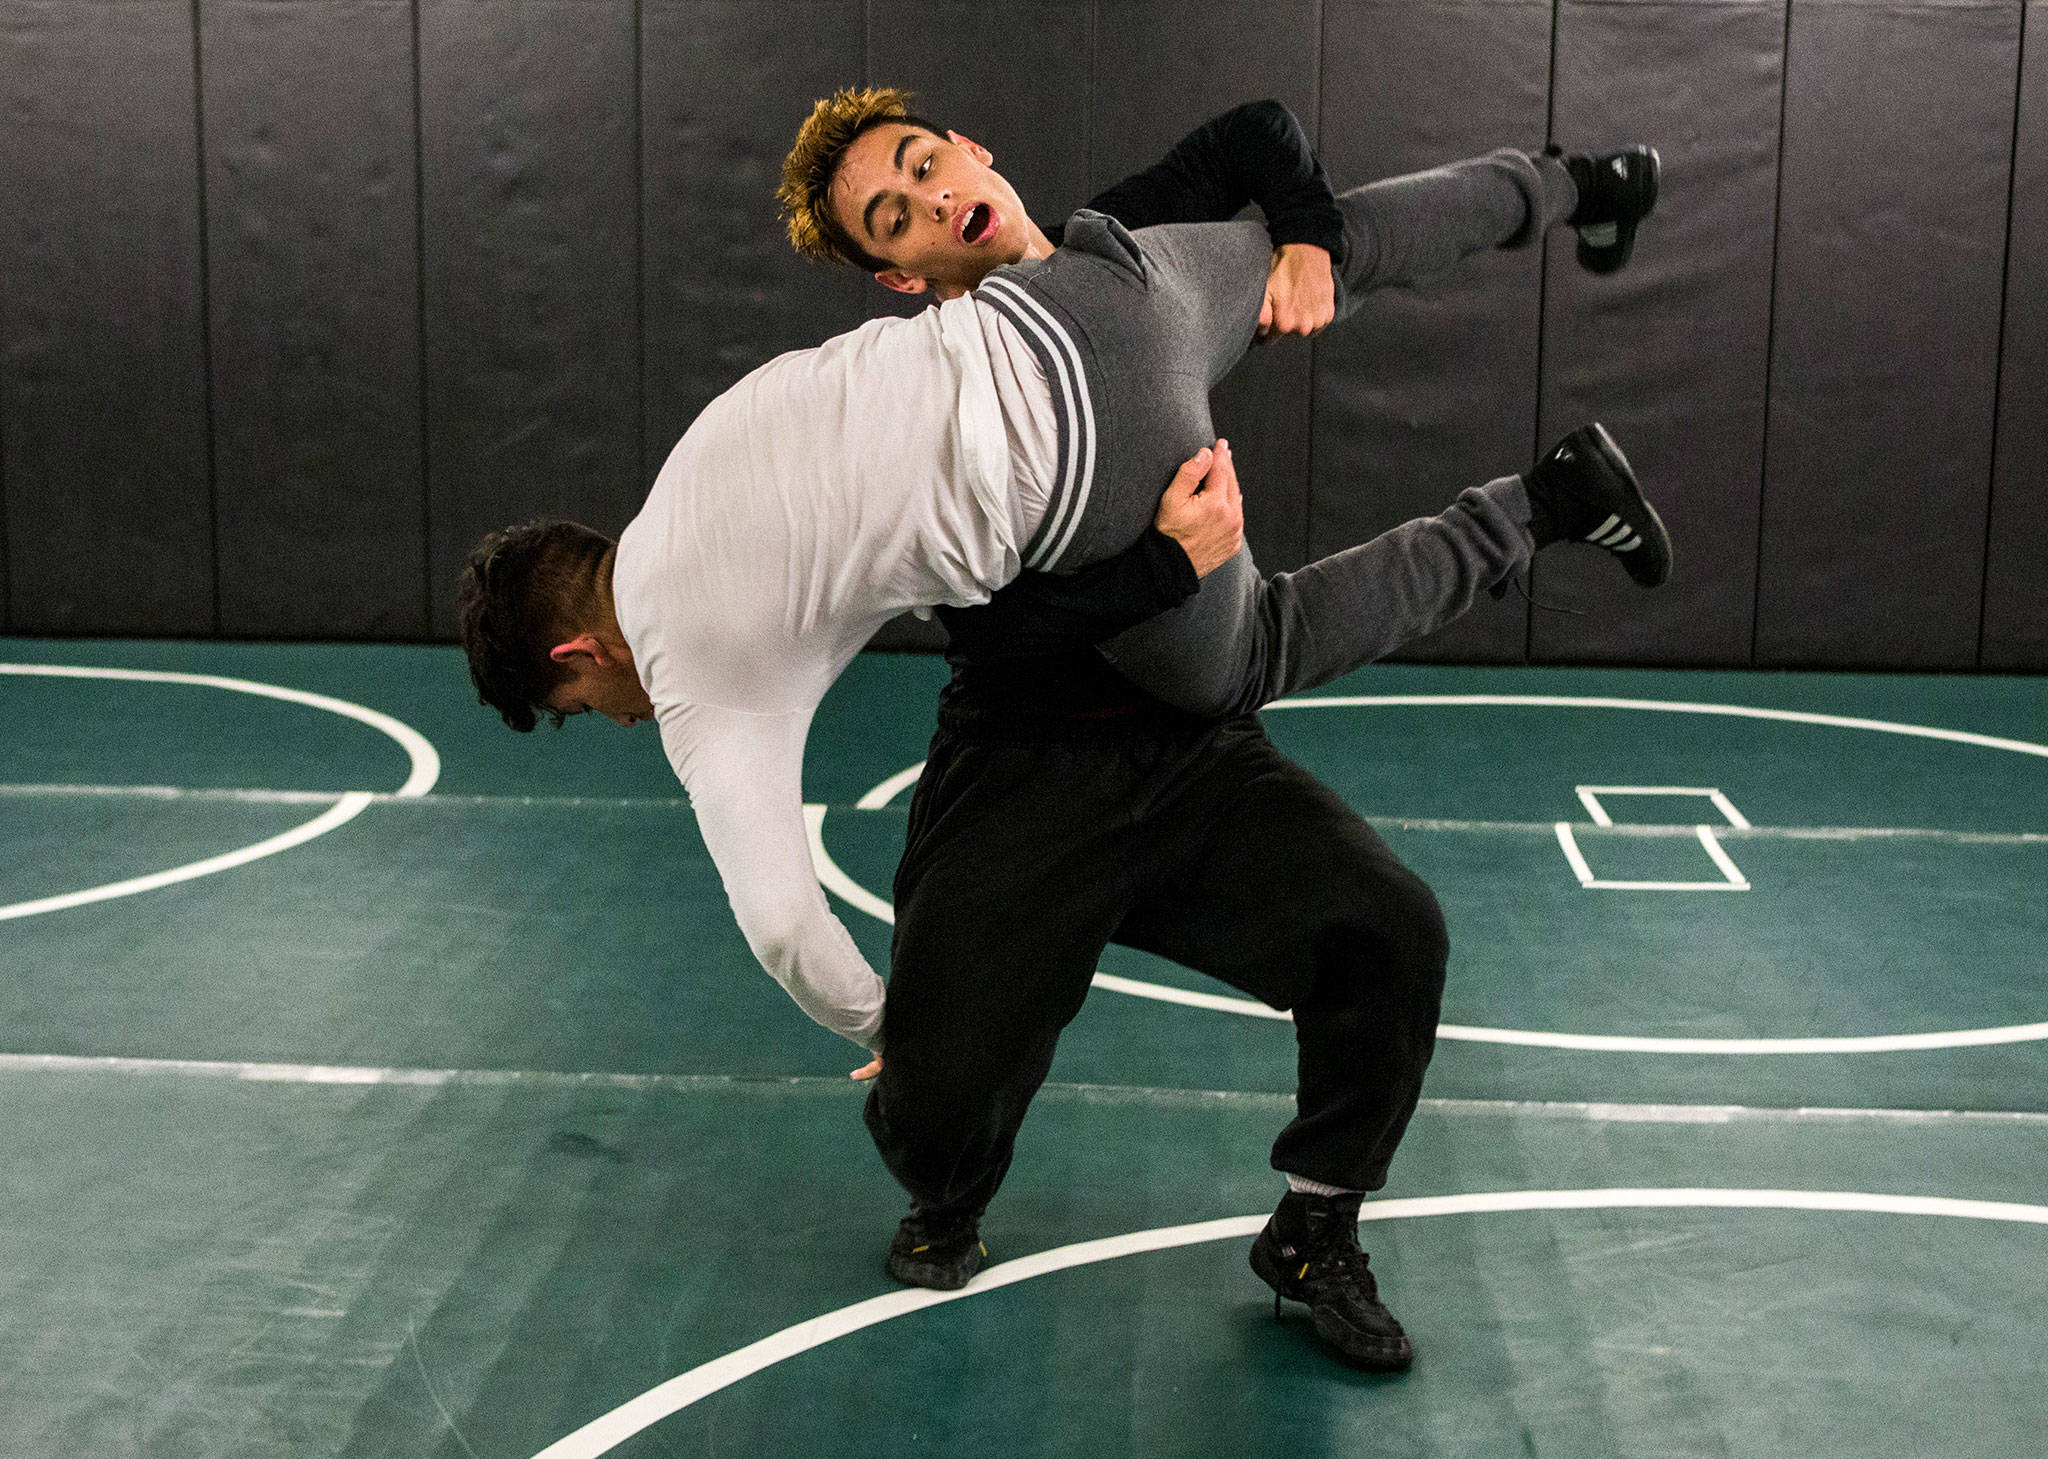 Marysville Getchell’s Trey Padgett lifts training partner Jesus Cabadas during a lift-and-return drill during a team practice Dec. 11 Marysville. (Olivia Vanni / The Herald)